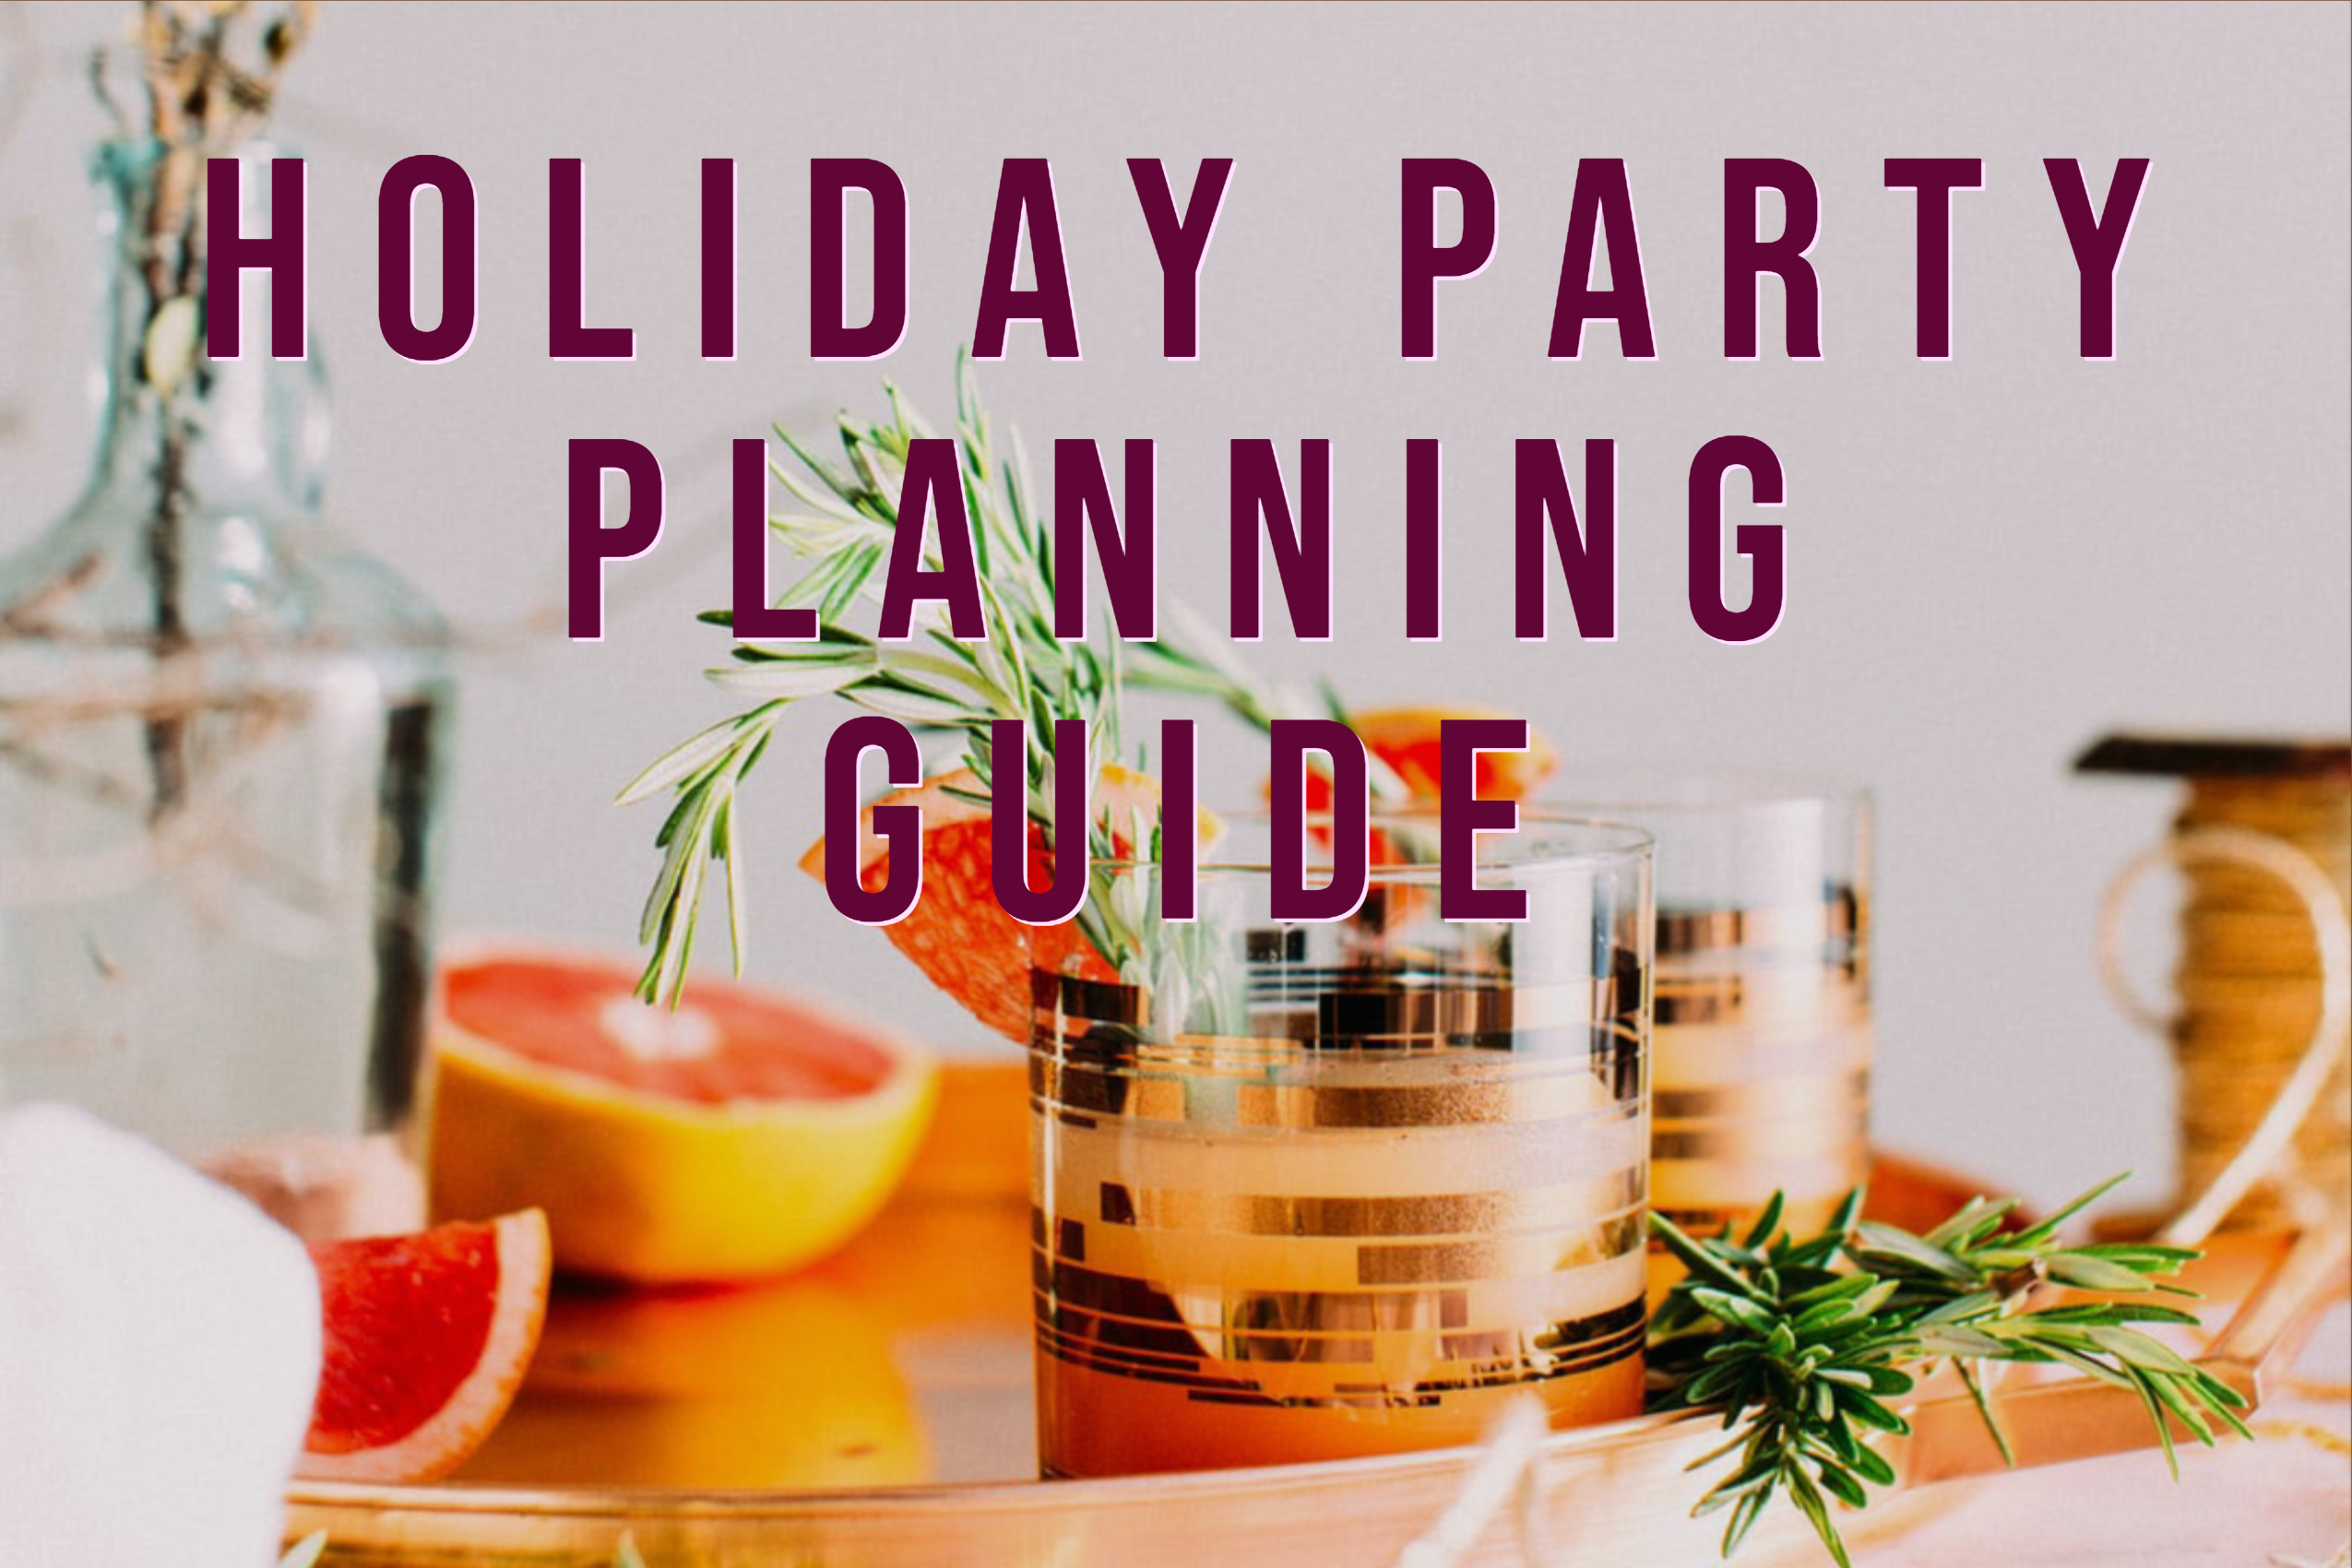 Newsletter holiday planning guide image